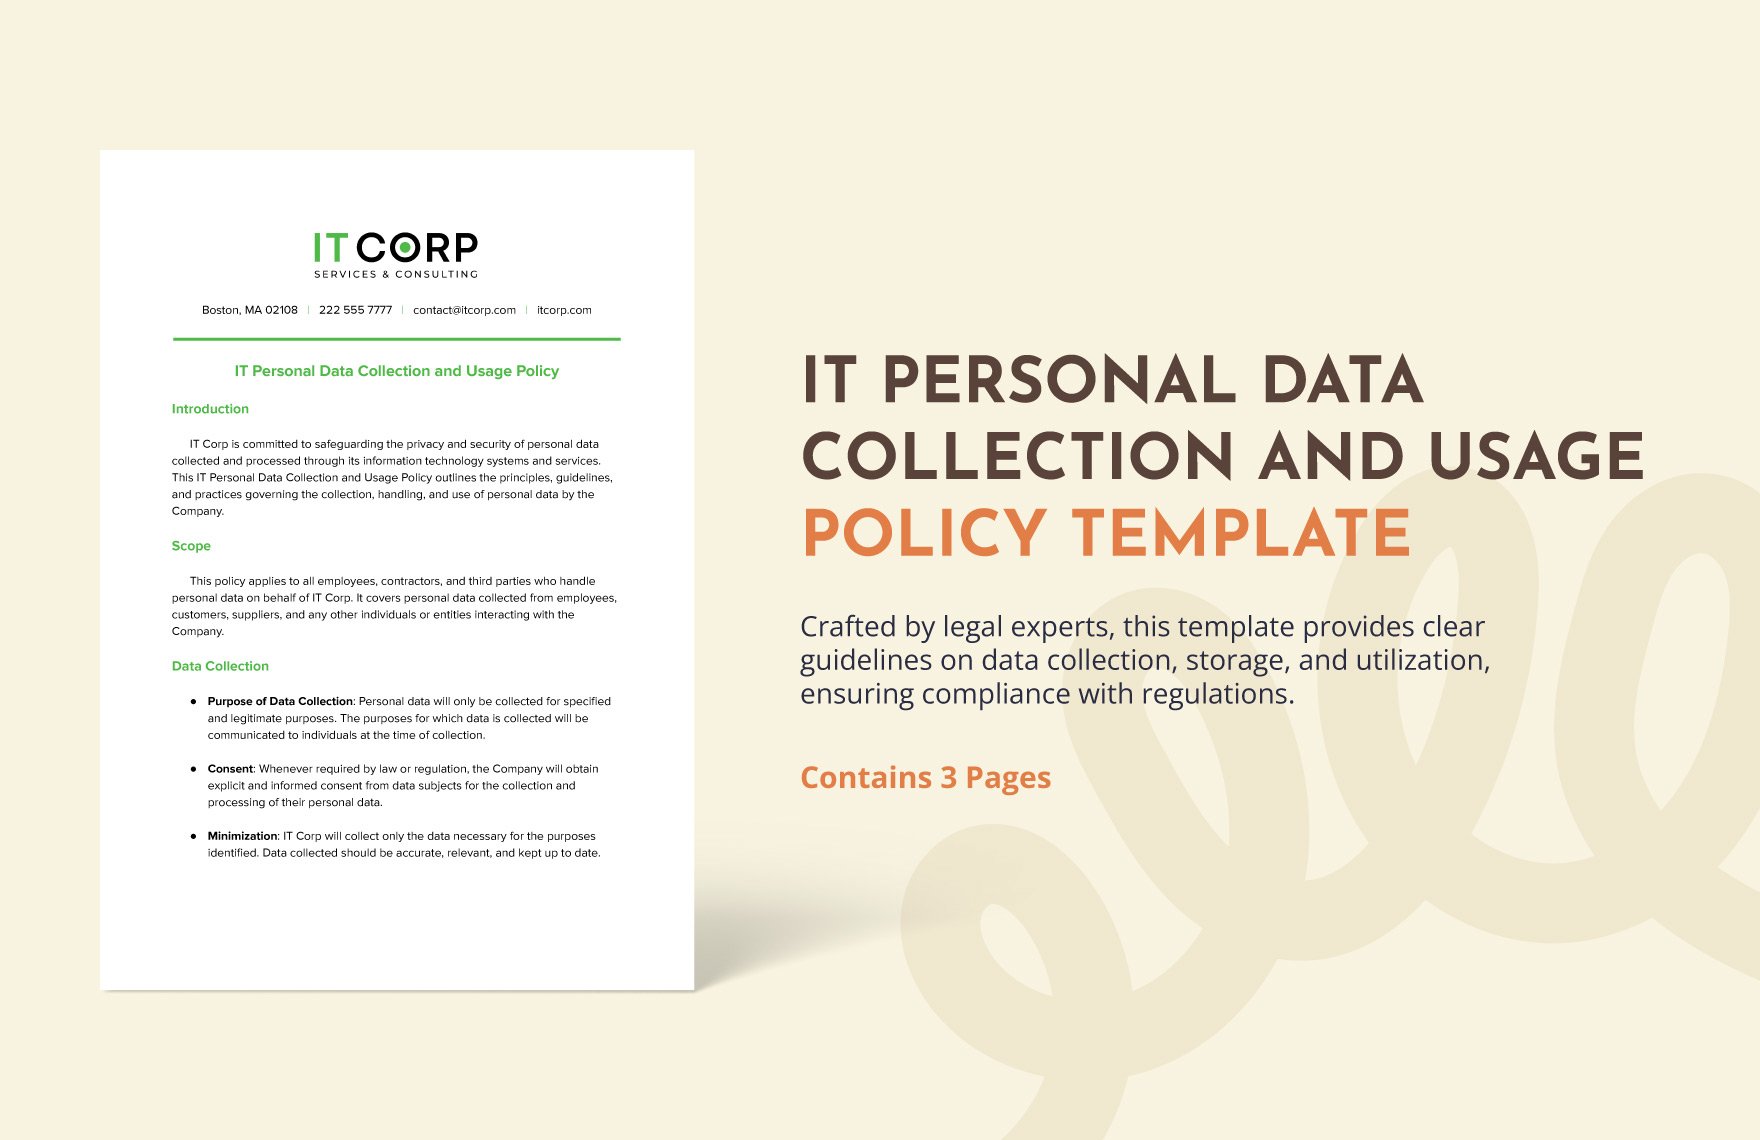 IT Personal Data Collection and Usage Policy Template